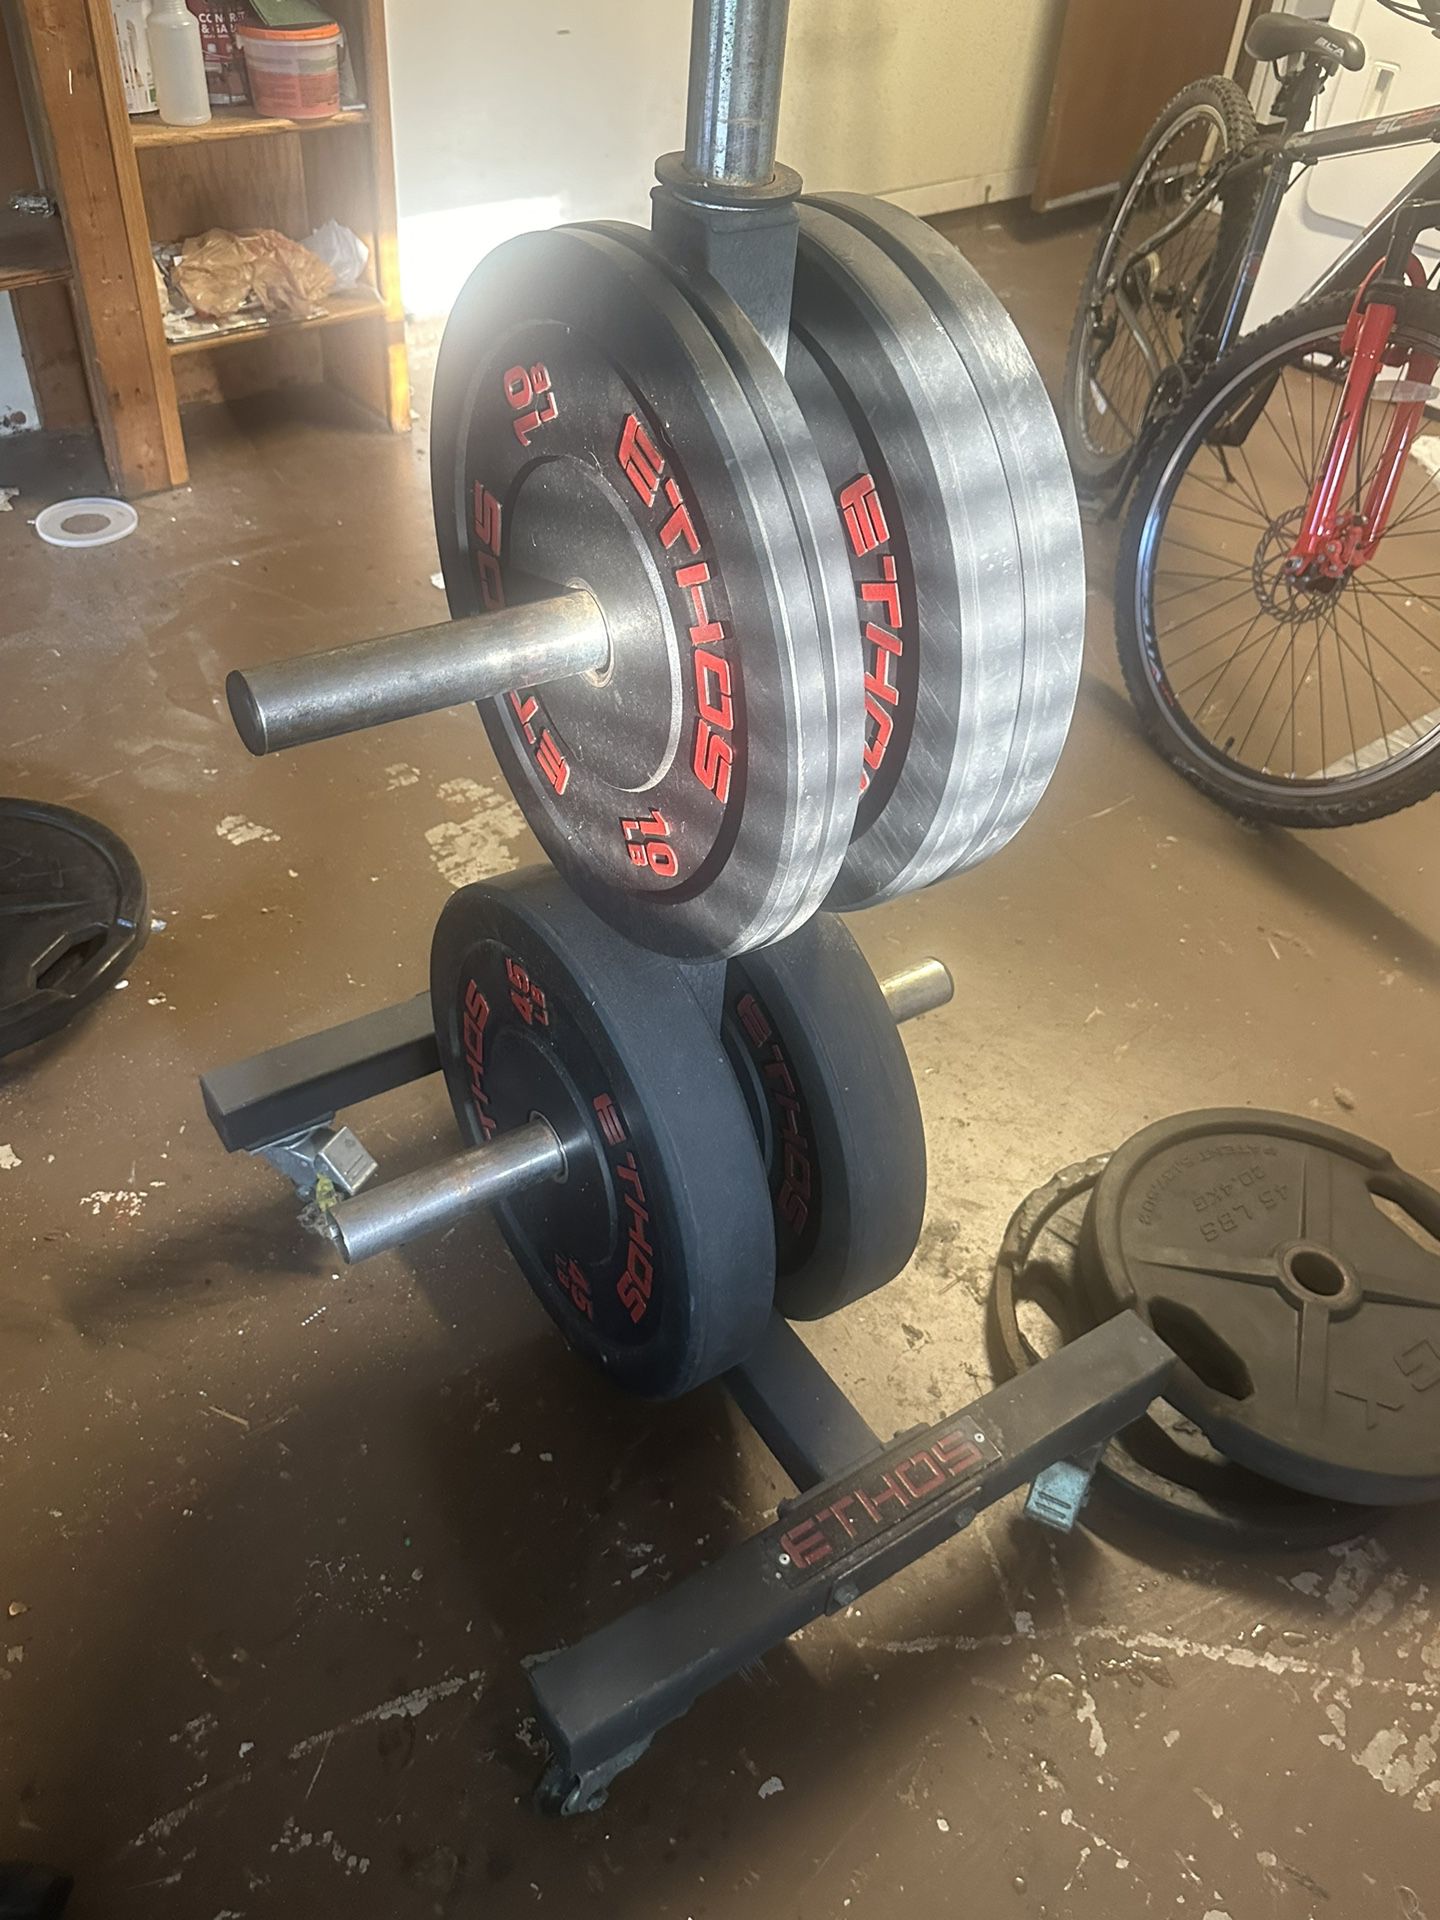 Weight Plates With Ethos Set/Tree